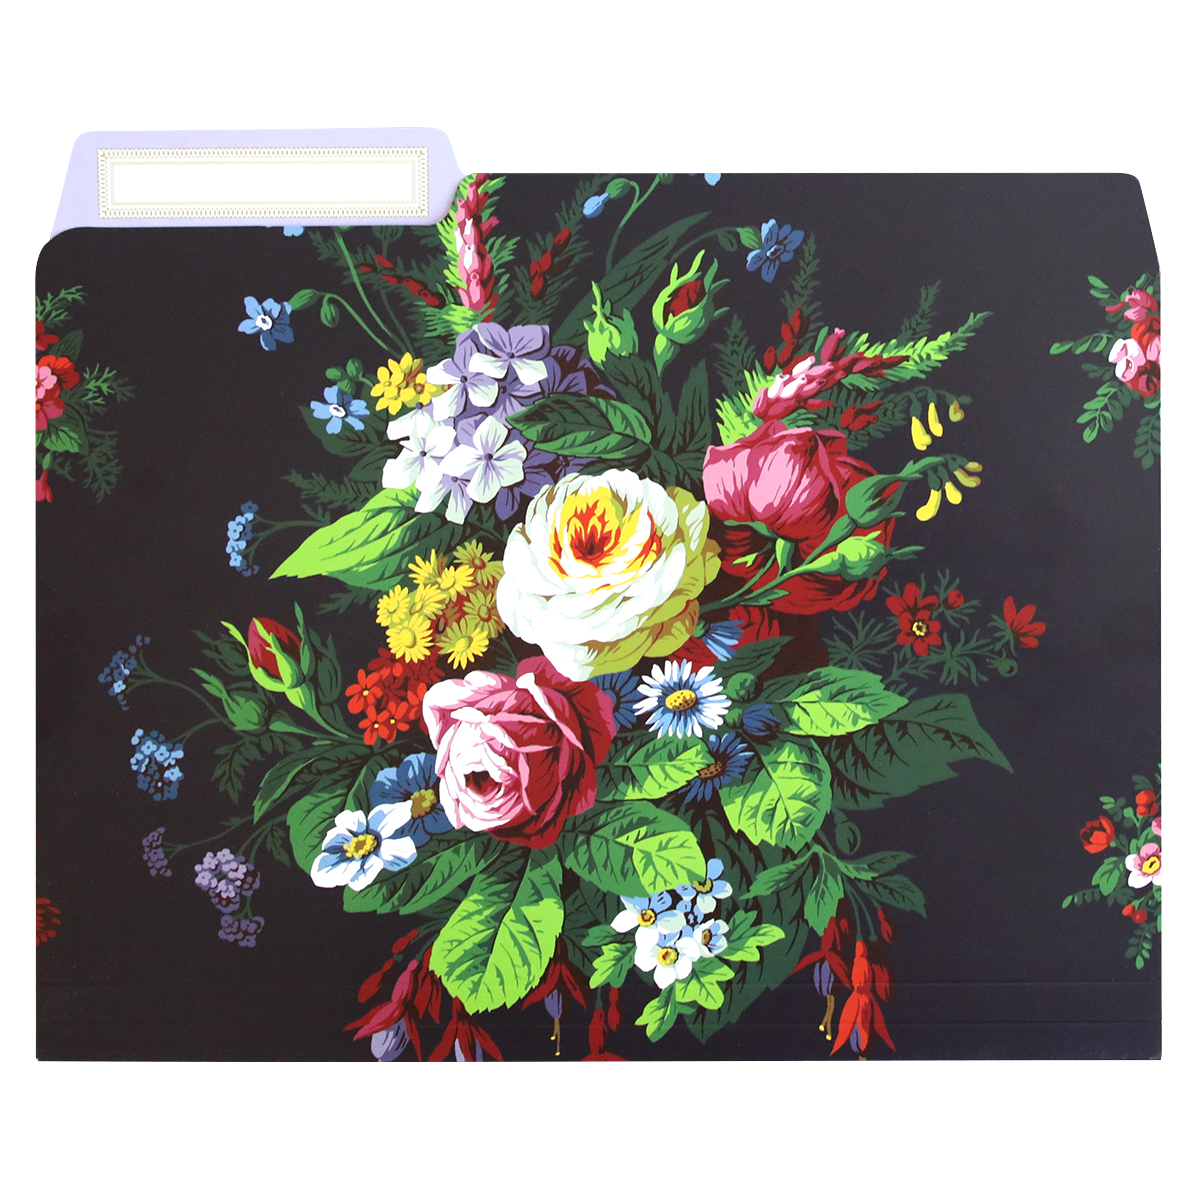 An Astrid Floral File Folder containing 12 standard size folders and 3 tab dividers.